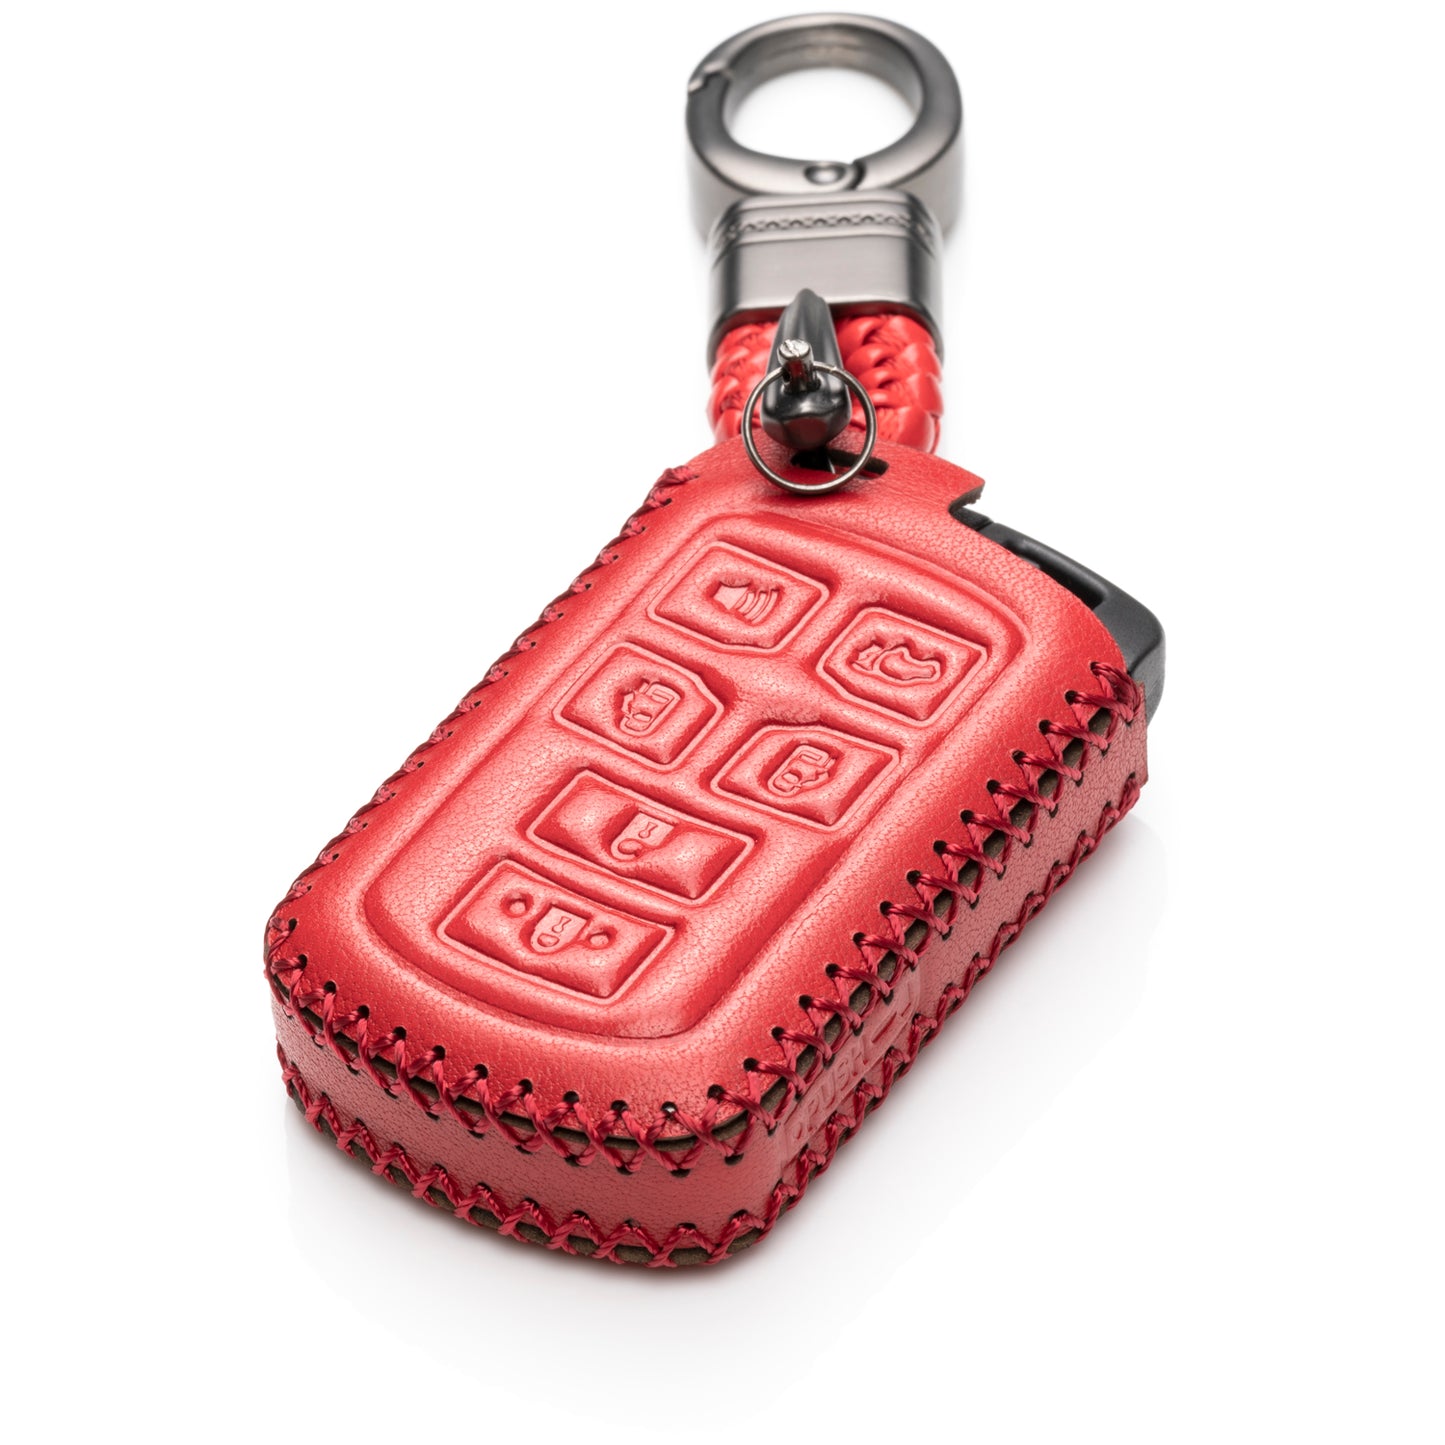 Vitodeco 6-Button Genuine Leather Smart Key Fob Case Cover with Compatible with Toyota Sienna 2011-2020